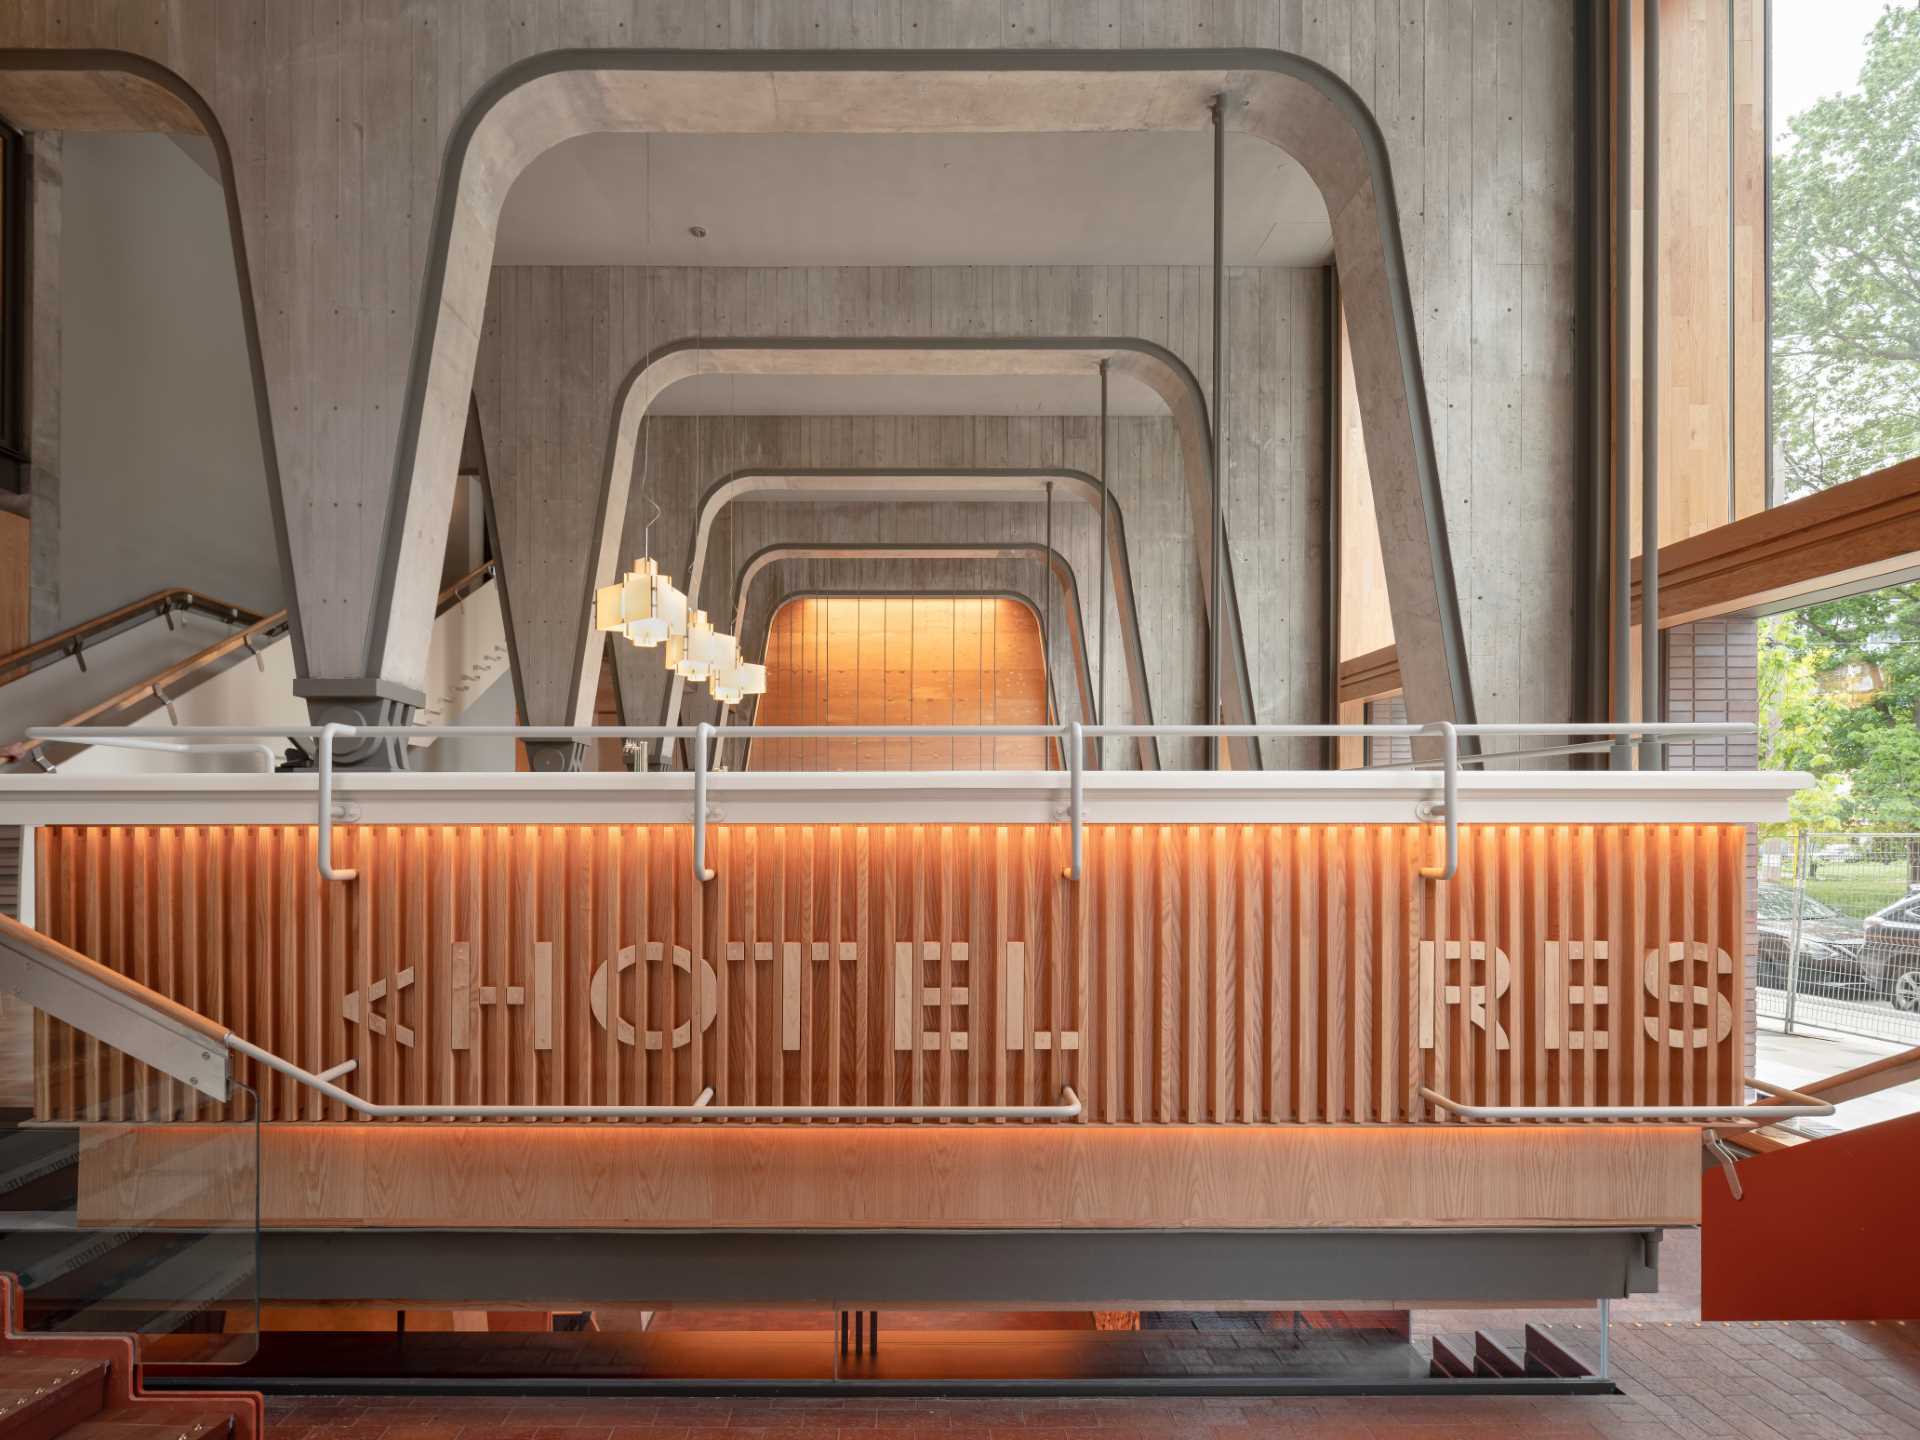 The Ace Hotel in Toronto has a loft lobby featuring concrete and wood elements.